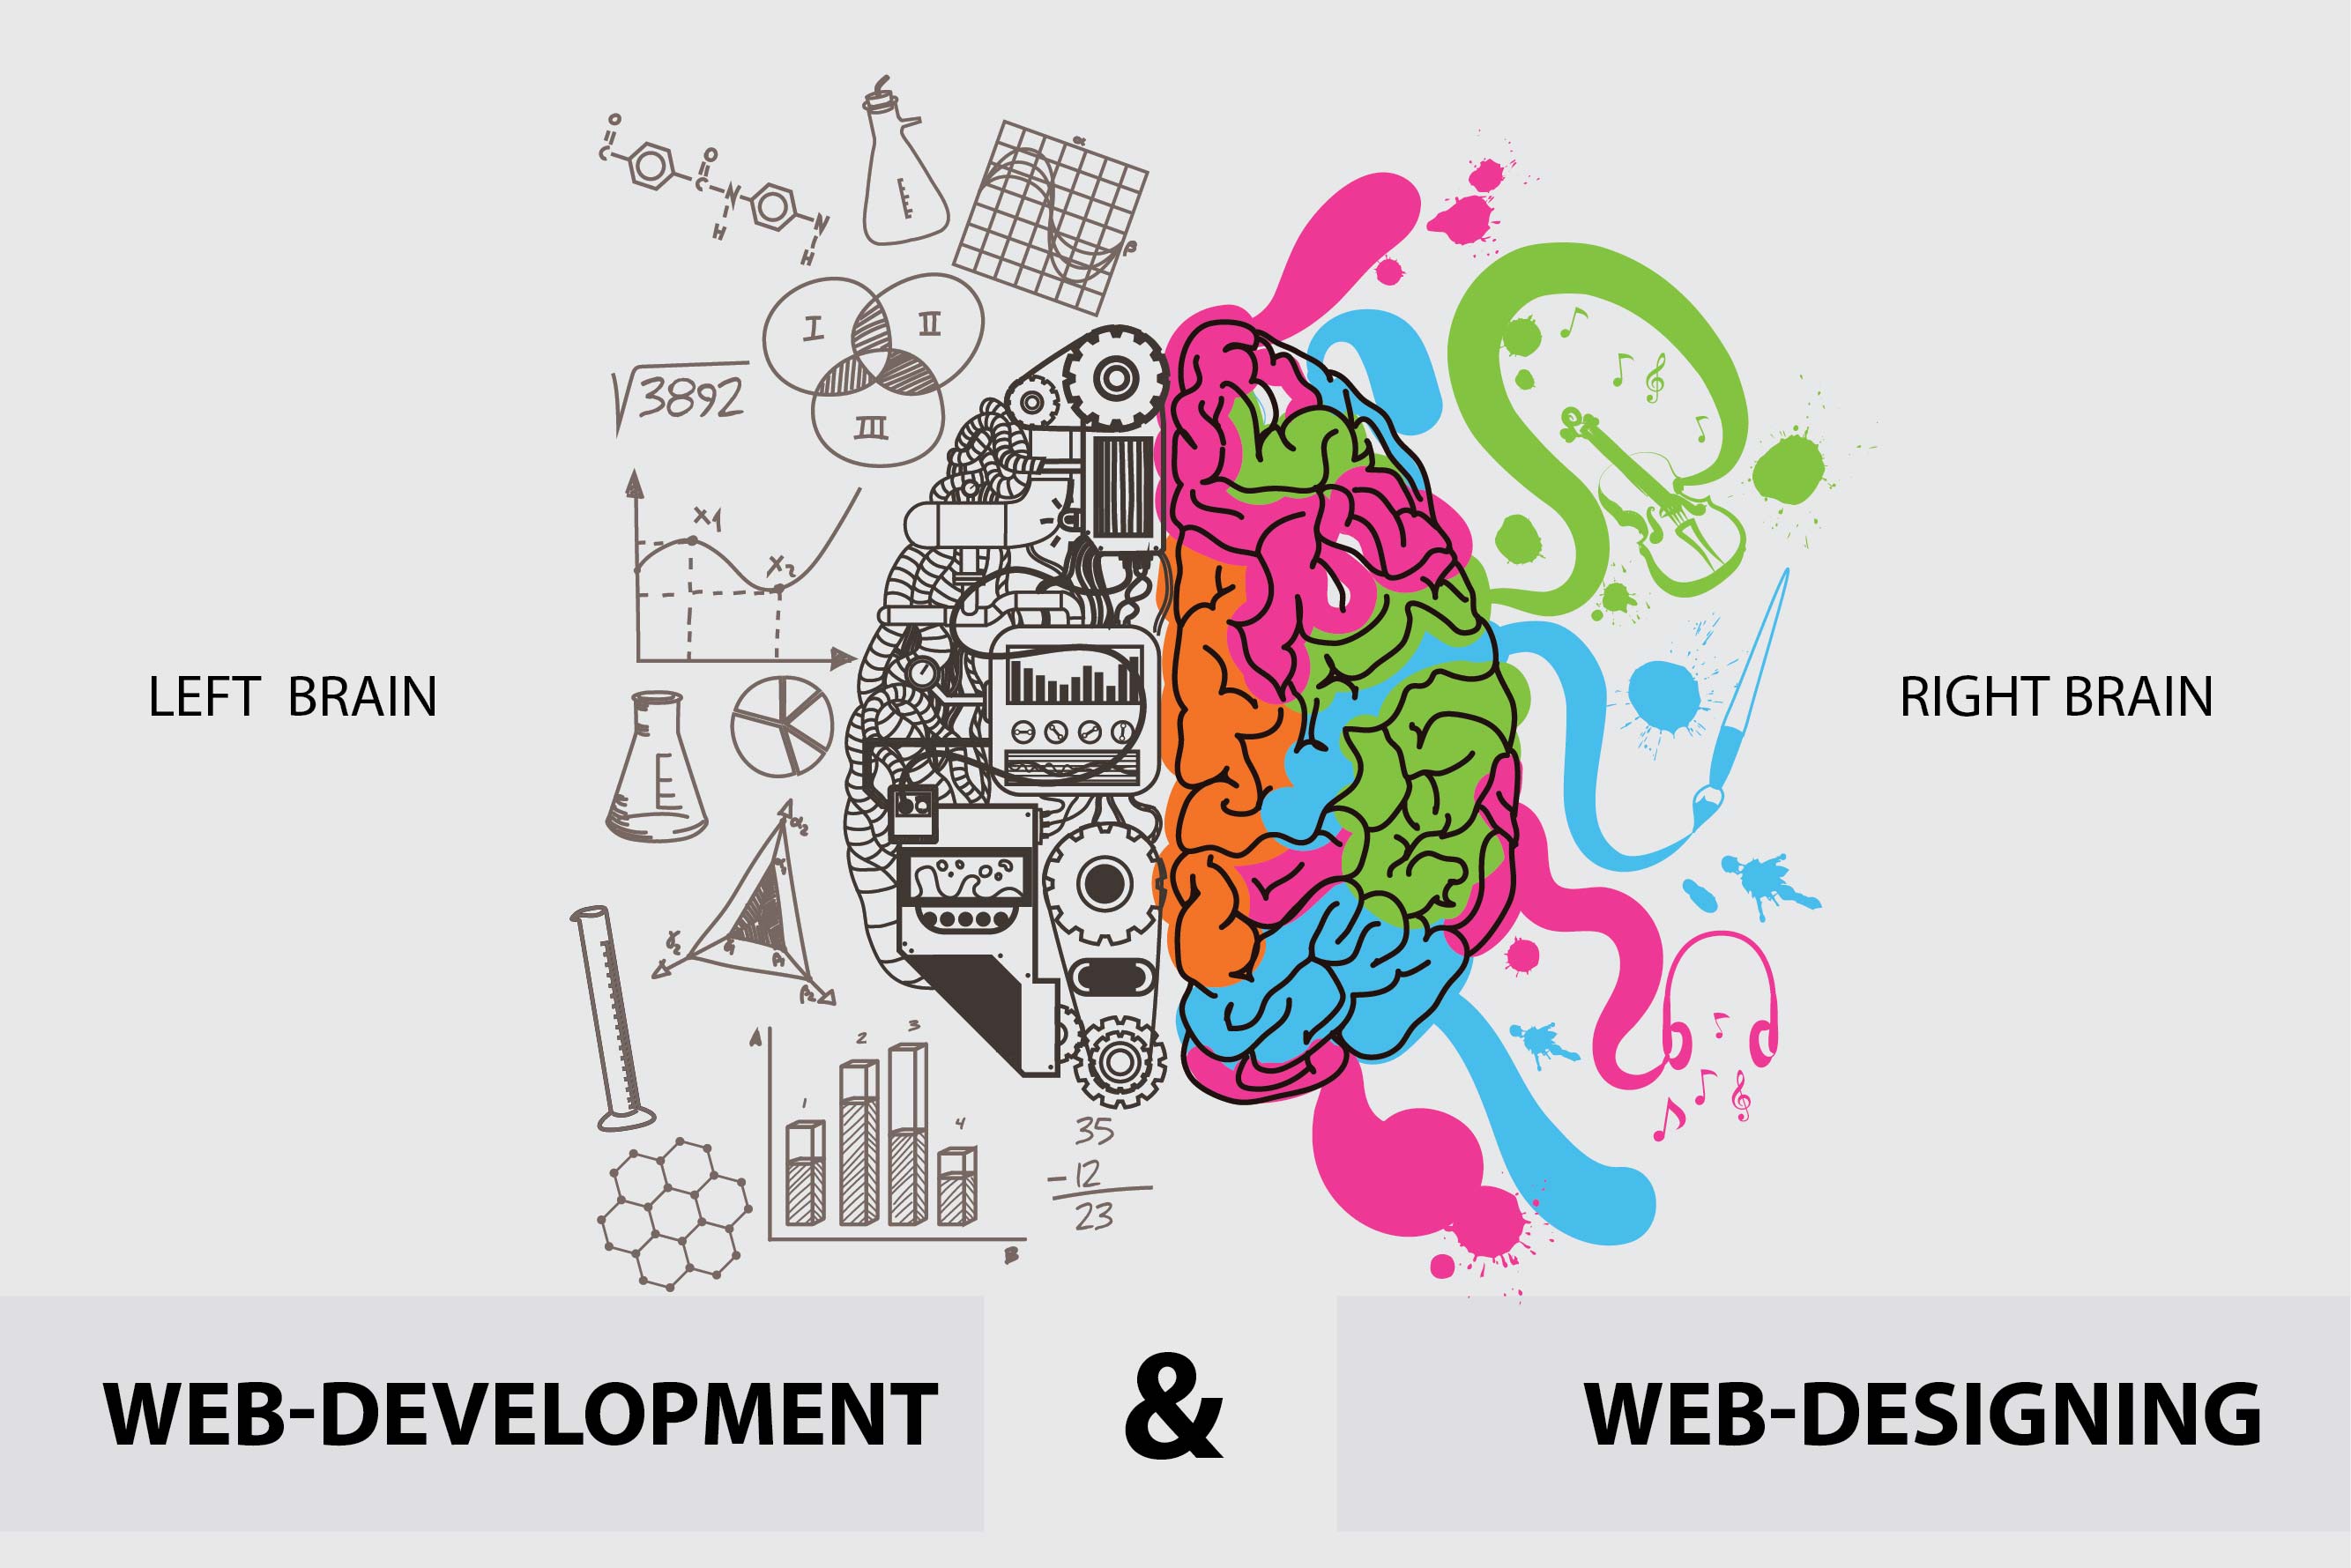 What is the difference between Web-designing & Web-development?